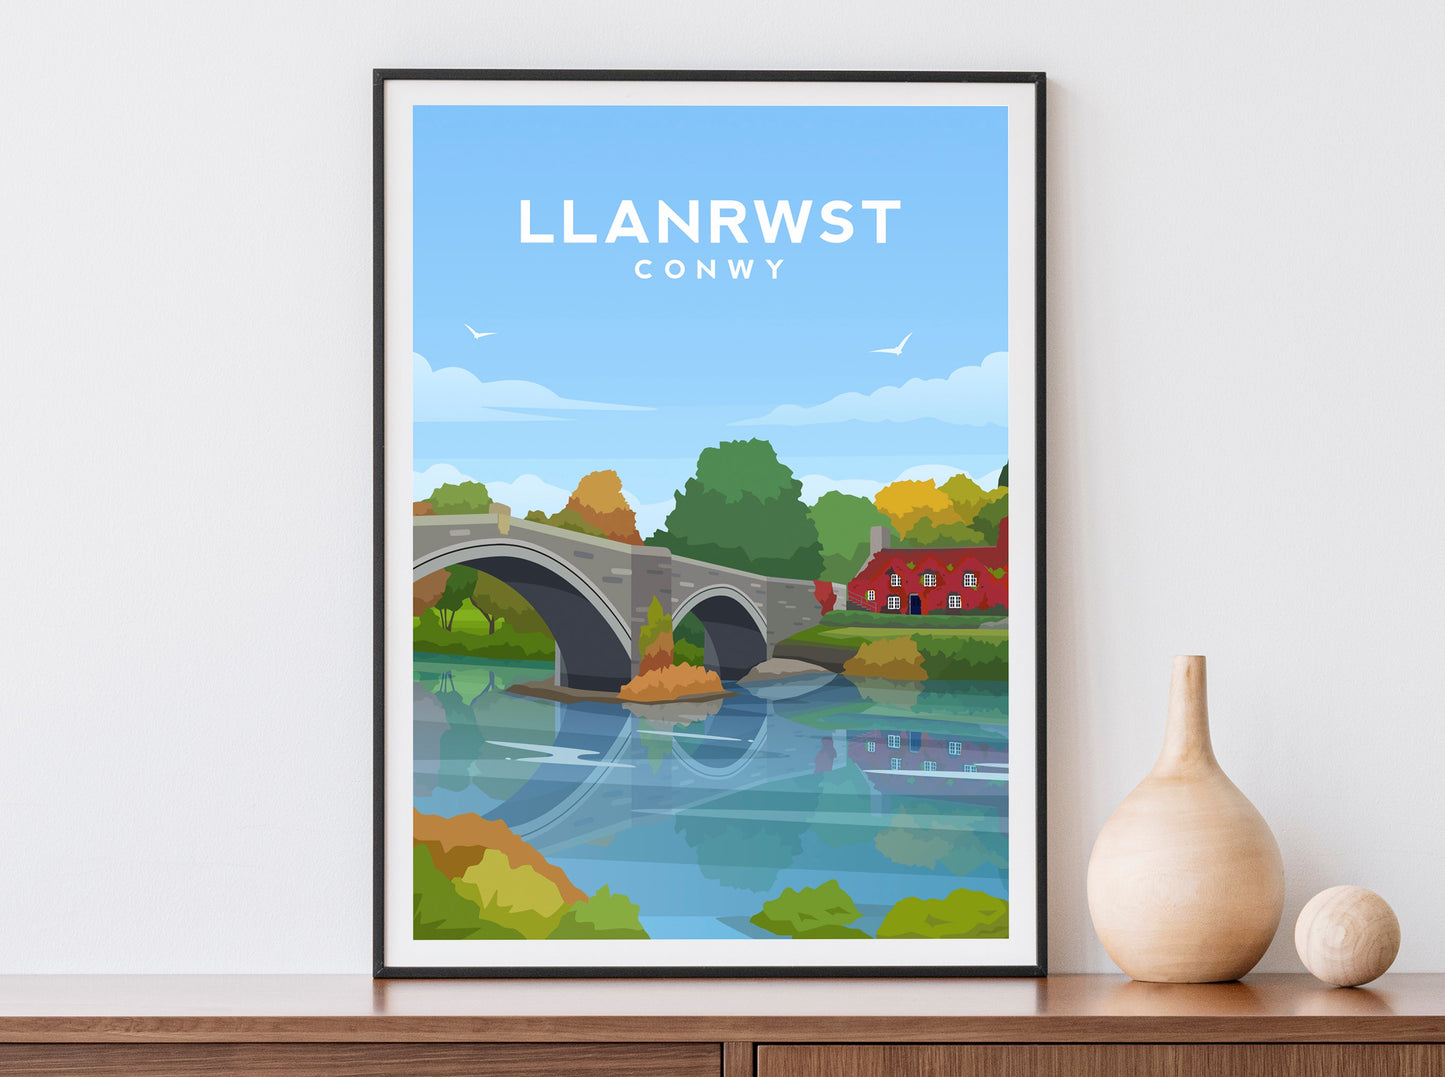 Set of 3 Conwy Wales Prints - Travel Wall Art by Typelab